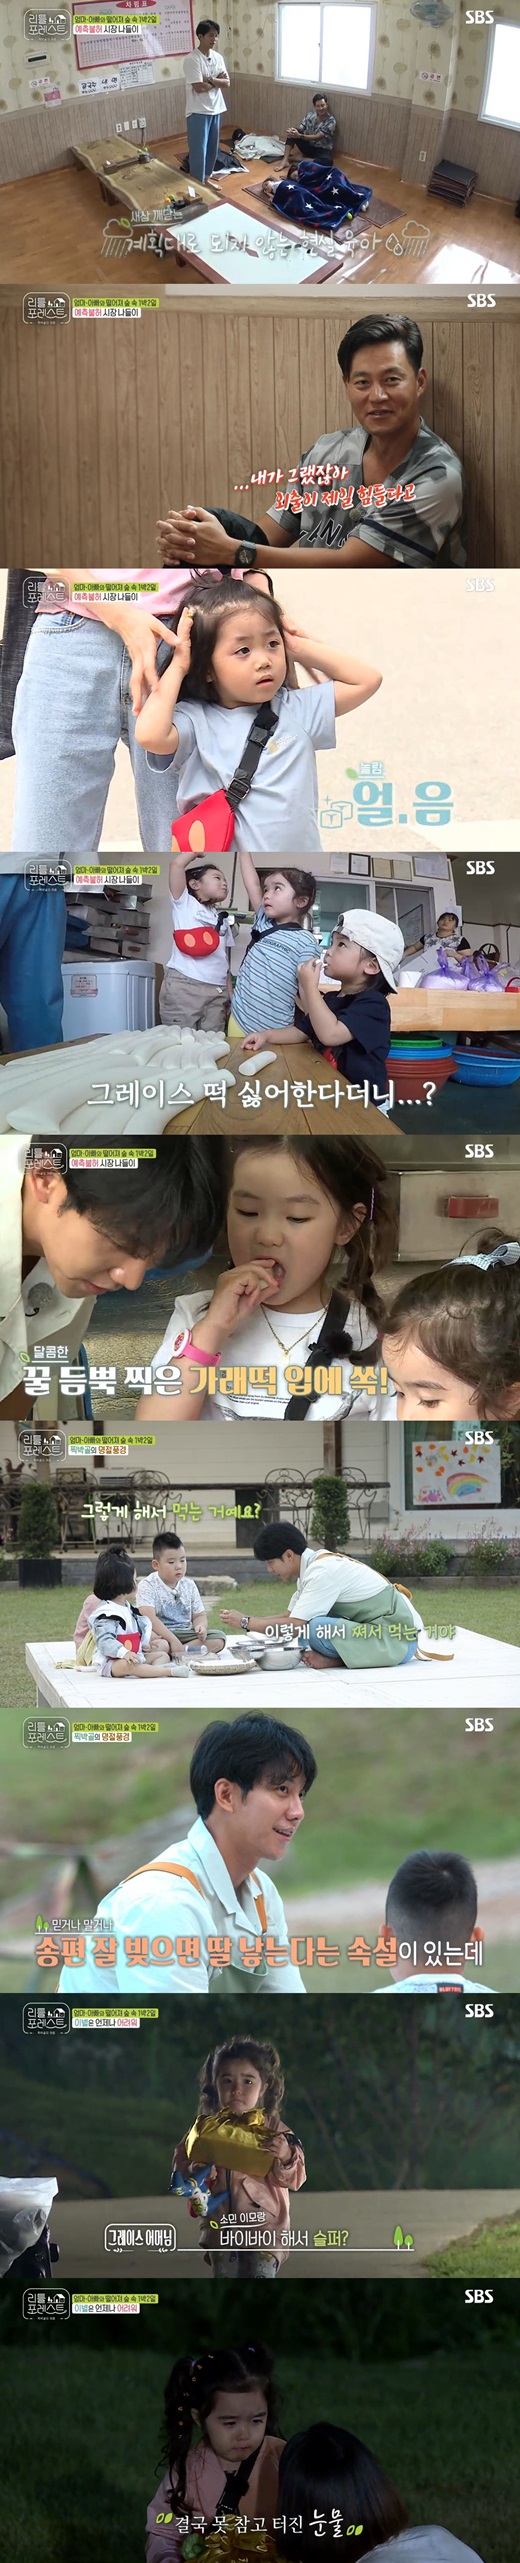 SBSs monthly entertainment Little Forest saw its highest audience rating rise to 6.1% per minute.On SBS Little Forest broadcasted on the night of the 17th, Lee Seo-jin, Lee Seung-gi, Park Na-rae and Jung So-min were shown in the market with Little.The carers and the Littles headed to the market to buy the ingredients for the holiday food, and the Littles were excited about the first market outing with The Uncle and Auntie.But the excitement was also a moment, and Lee Seung-gi and Lee Seo-jin lamented that if you have children, there is nothing that you think is going to happen.Lee Seung-gi and Lee Seo-jin sighed when they lay the Littles in Restaurant.In the meantime, Park Na-rae and Jung So-min had a good time watching the process of popping with Lee Han and Ye Jun.Waking up, Eugene, Grace and Gaon headed for the market mill with Lee Seung-gi, who were happy to eat freshly-made rice cakes in honey.Since then, I have bought hot dogs in the market and enjoyed a pleasant outing with lunch together.After returning home after finishing the shopping, they started making Chuseok food such as Songpyeon and the war.Following the demonstration of Lee Seung-gi The Uncle, The Master of Songpyeon, Little also participated in the songpyeon debt.The family-like appearance of preparing Chuseok food together made me smile.In particular, Lee Seung-gi said, Is not there a myth that you will have a daughter if you make a songpyeon well?Little Lee enjoyed a generous dinner with the finished Songpyeon and Chuseok food.Later, the breakup time came for Littles to take their familys hands and return. Grace stopped and started crying.To her mother, who asked why, Grace cried, I miss Aunt Somin. The scene soared to 6.1% per minute of ratings, taking the best minute.It airs every Monday, Tuesday night at 10 p.m.